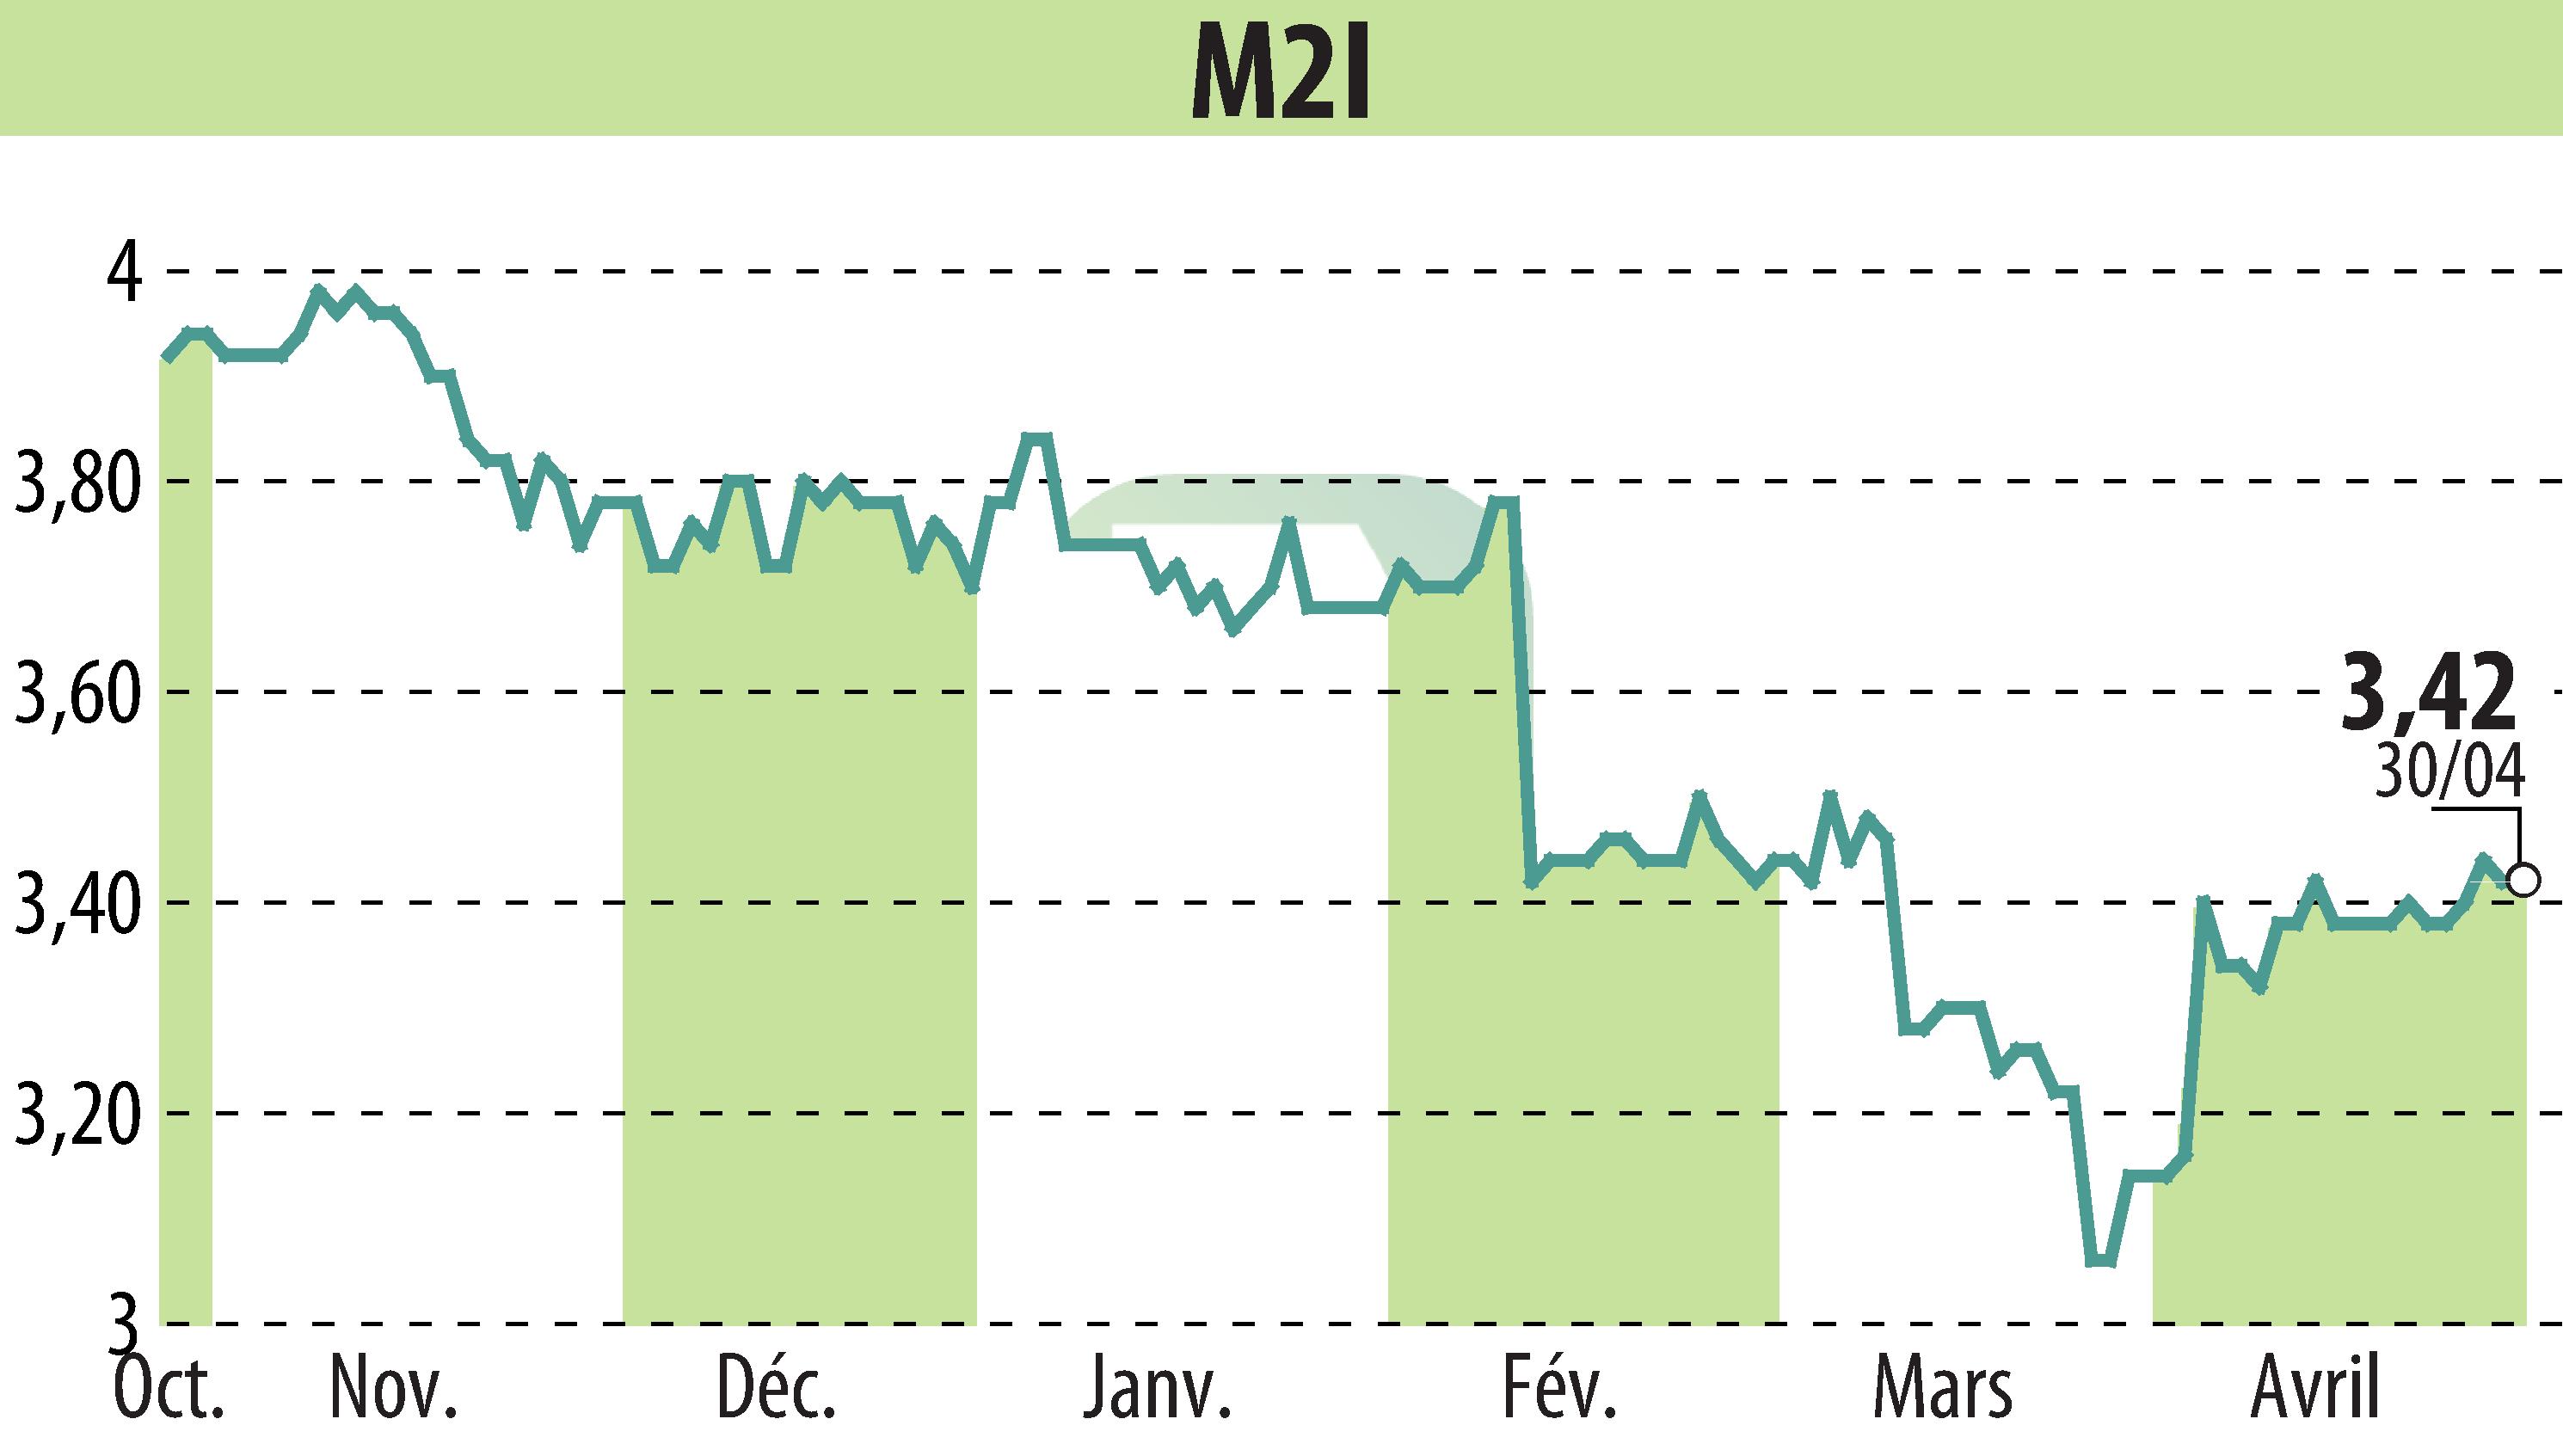 Stock price chart of M2I (EPA:ALMII) showing fluctuations.